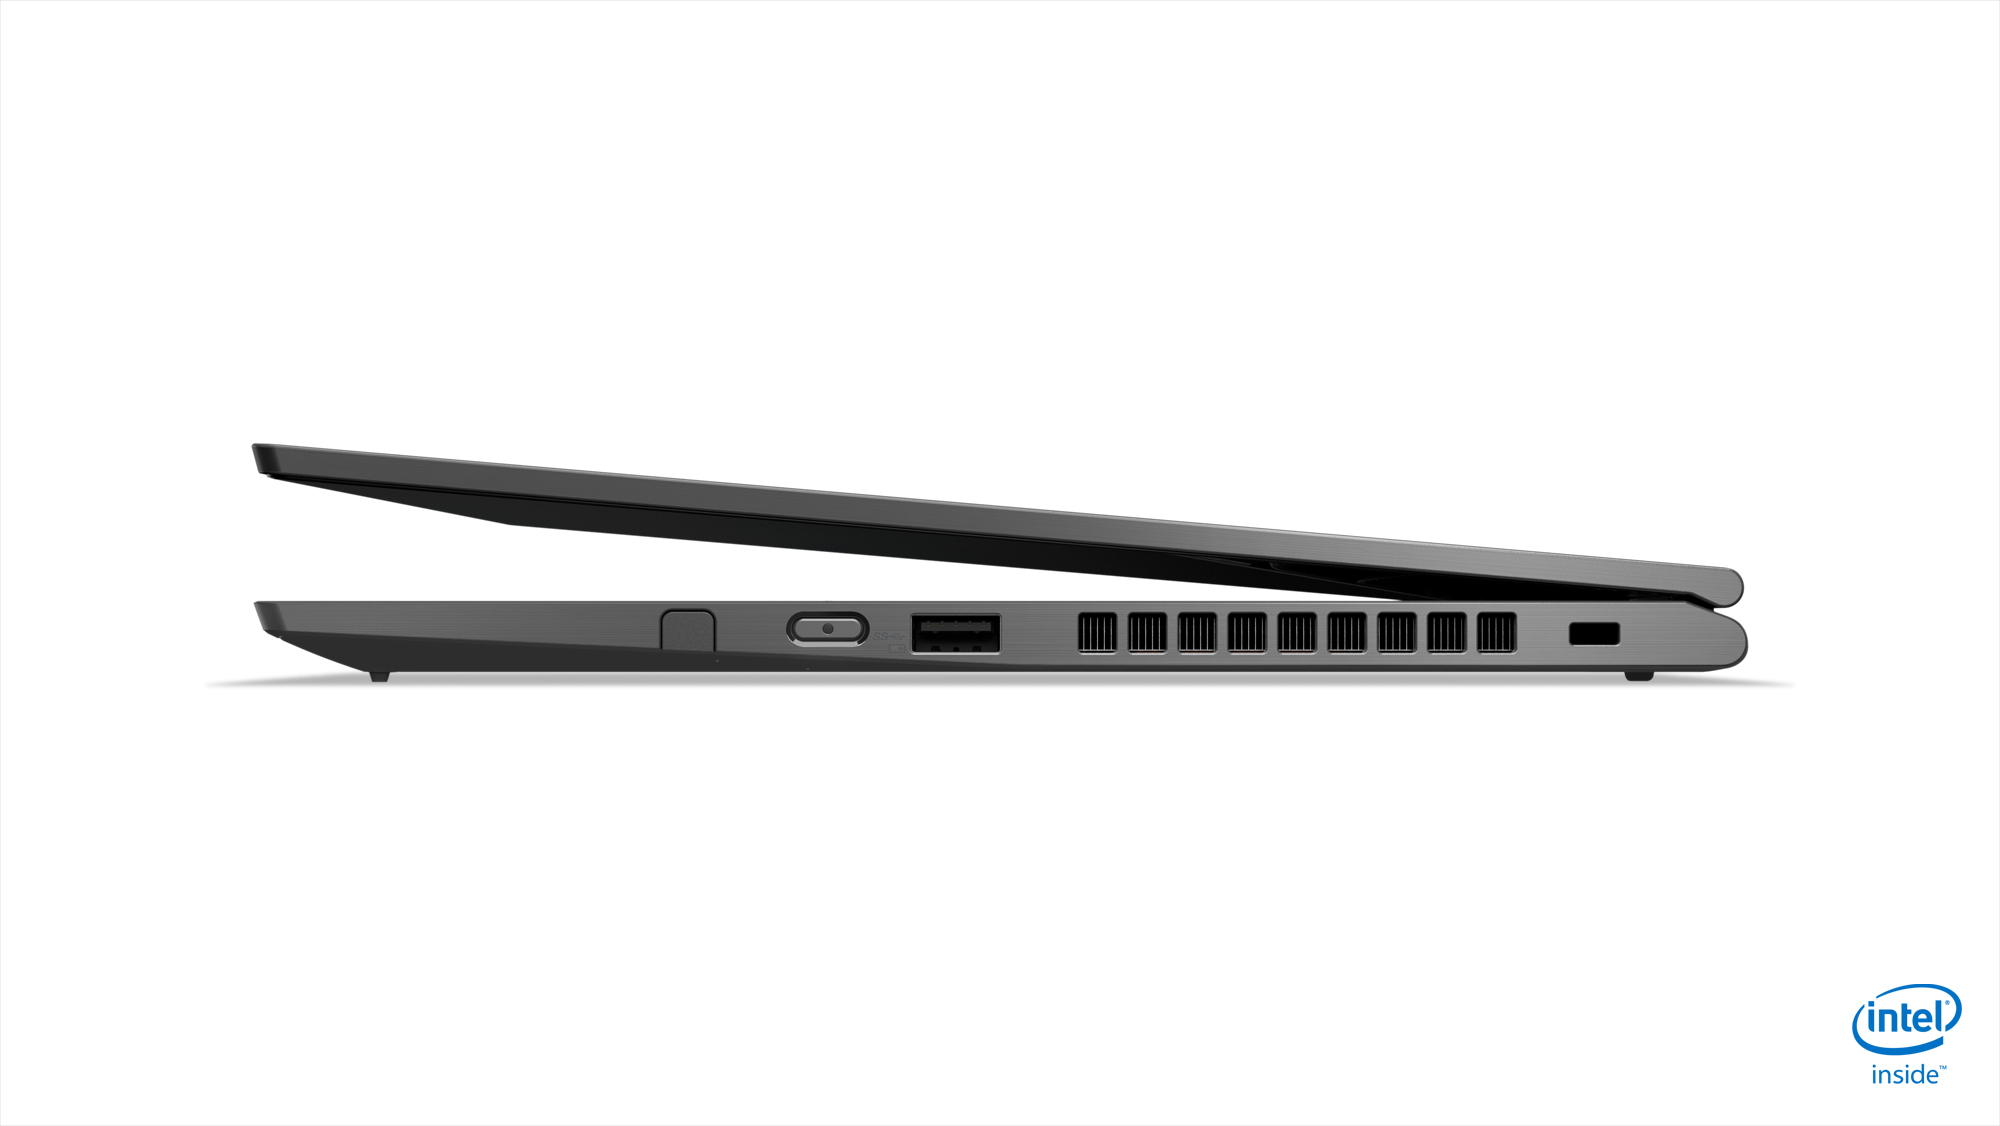 lenovo updated thinkpad x1 carbon yoga ces 2019 07 hero right with screen open